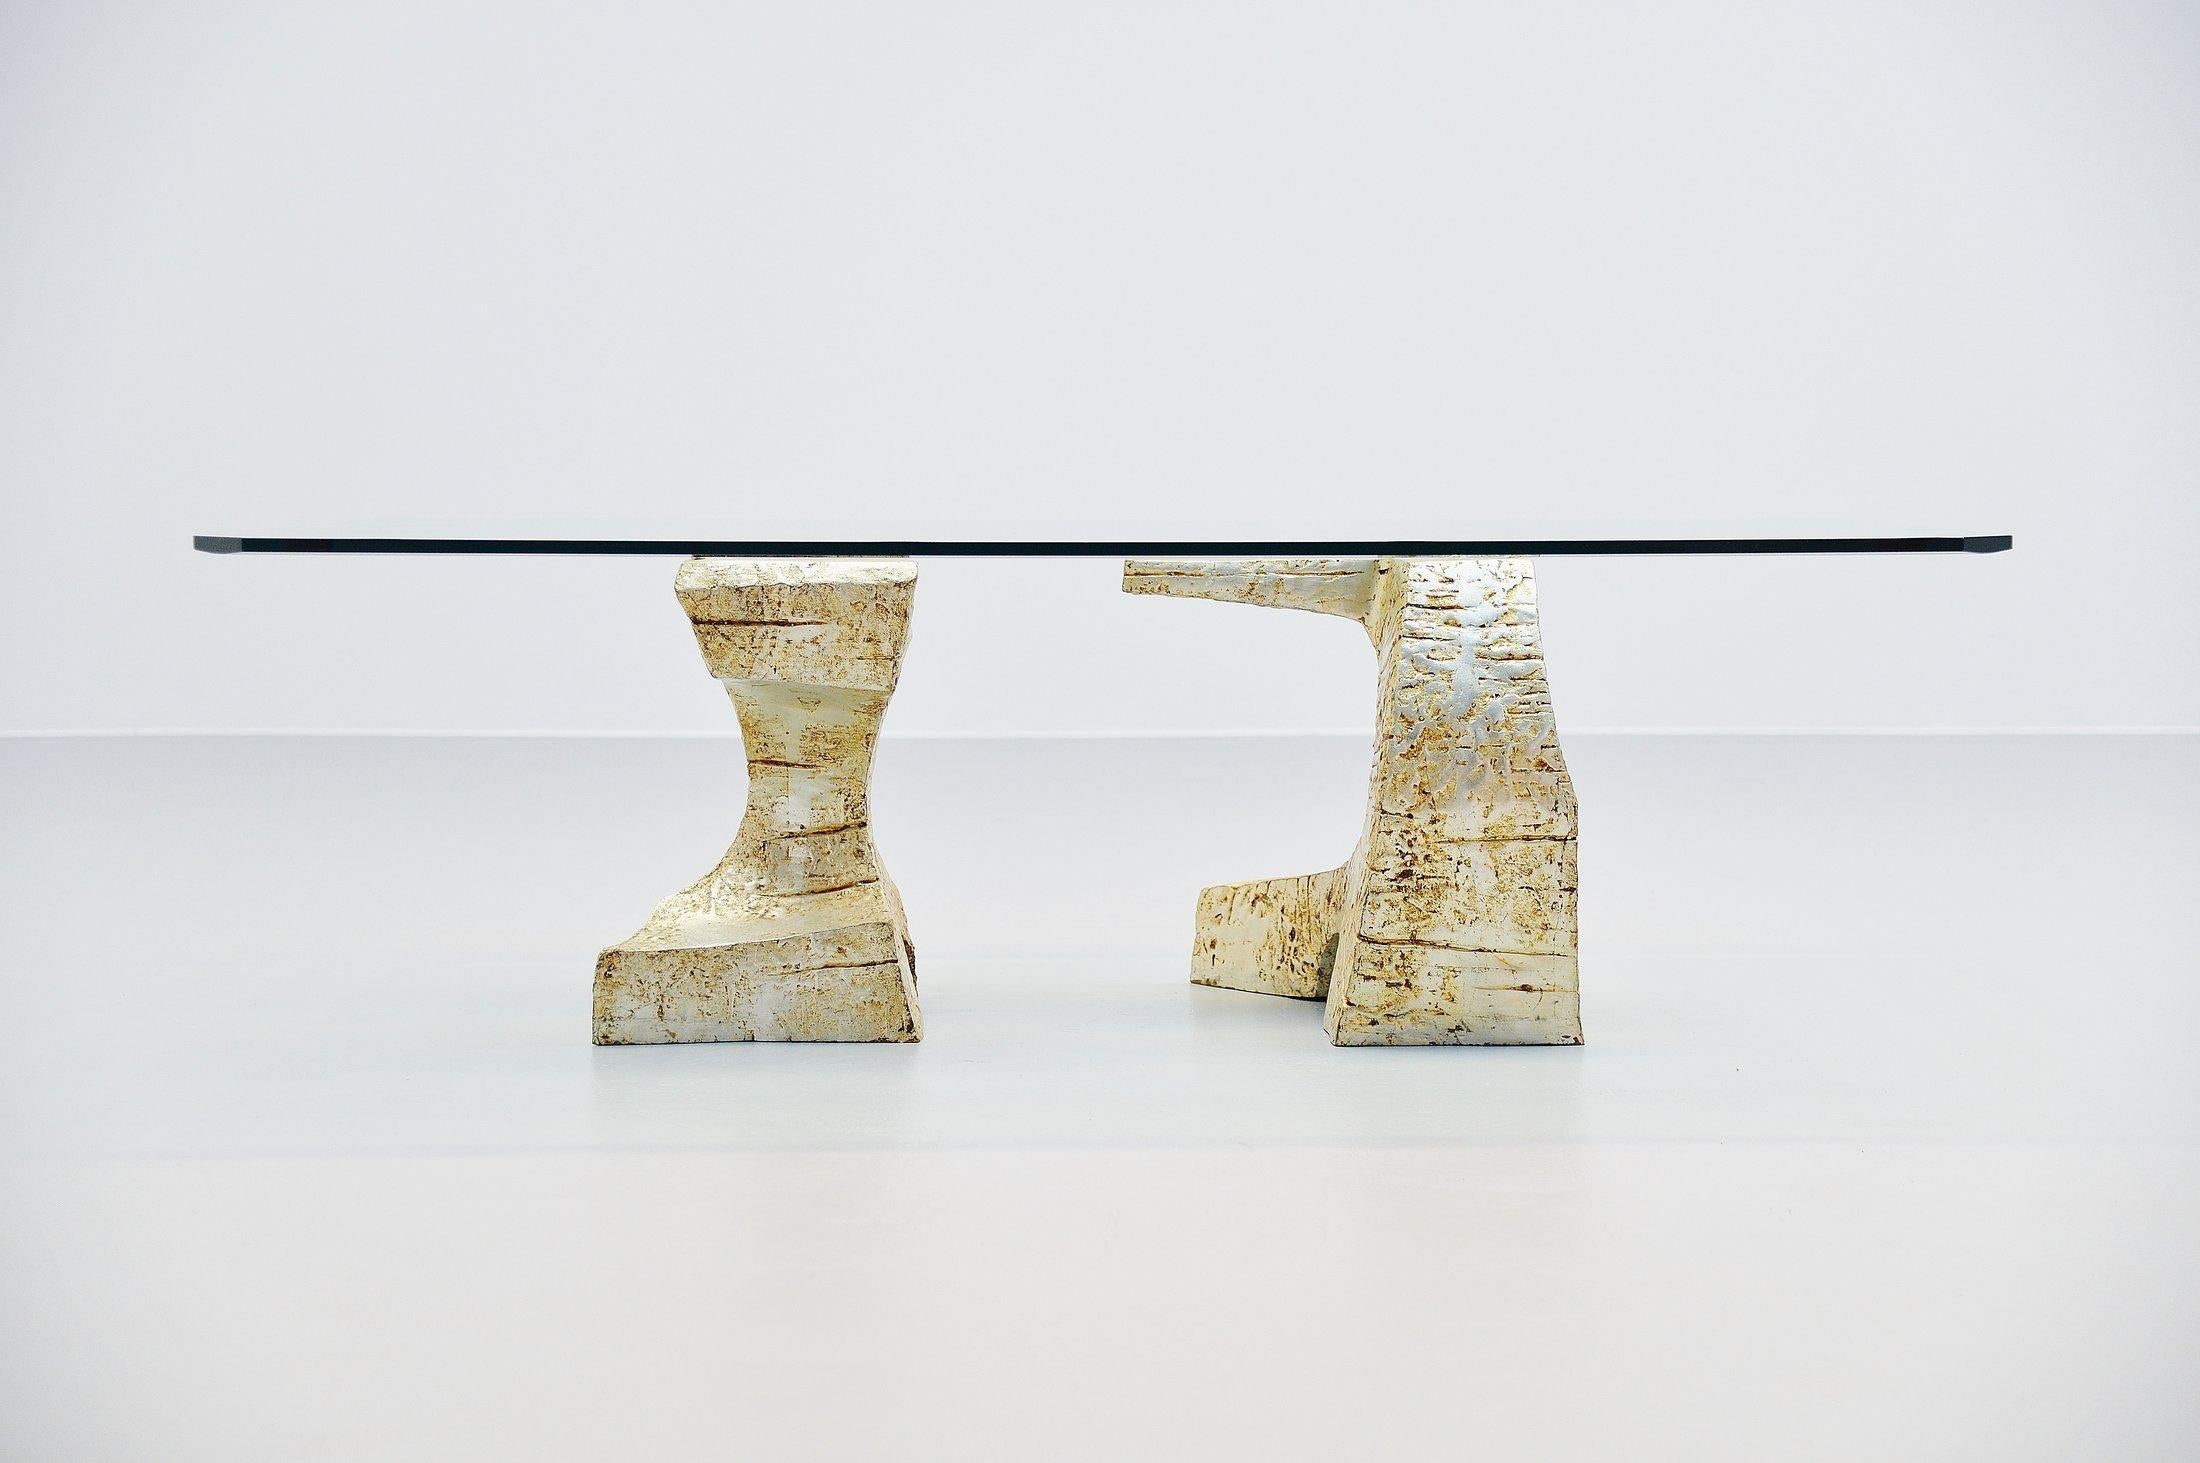 Spectacular bronze coffee table with sculptural bronze legs, made in Spain, 1970s. This fantastic sculpted coffee table has influences by Antoni Gaudi for example, you can see the strong brutalism in the architectural shaped feet. The bronze feet